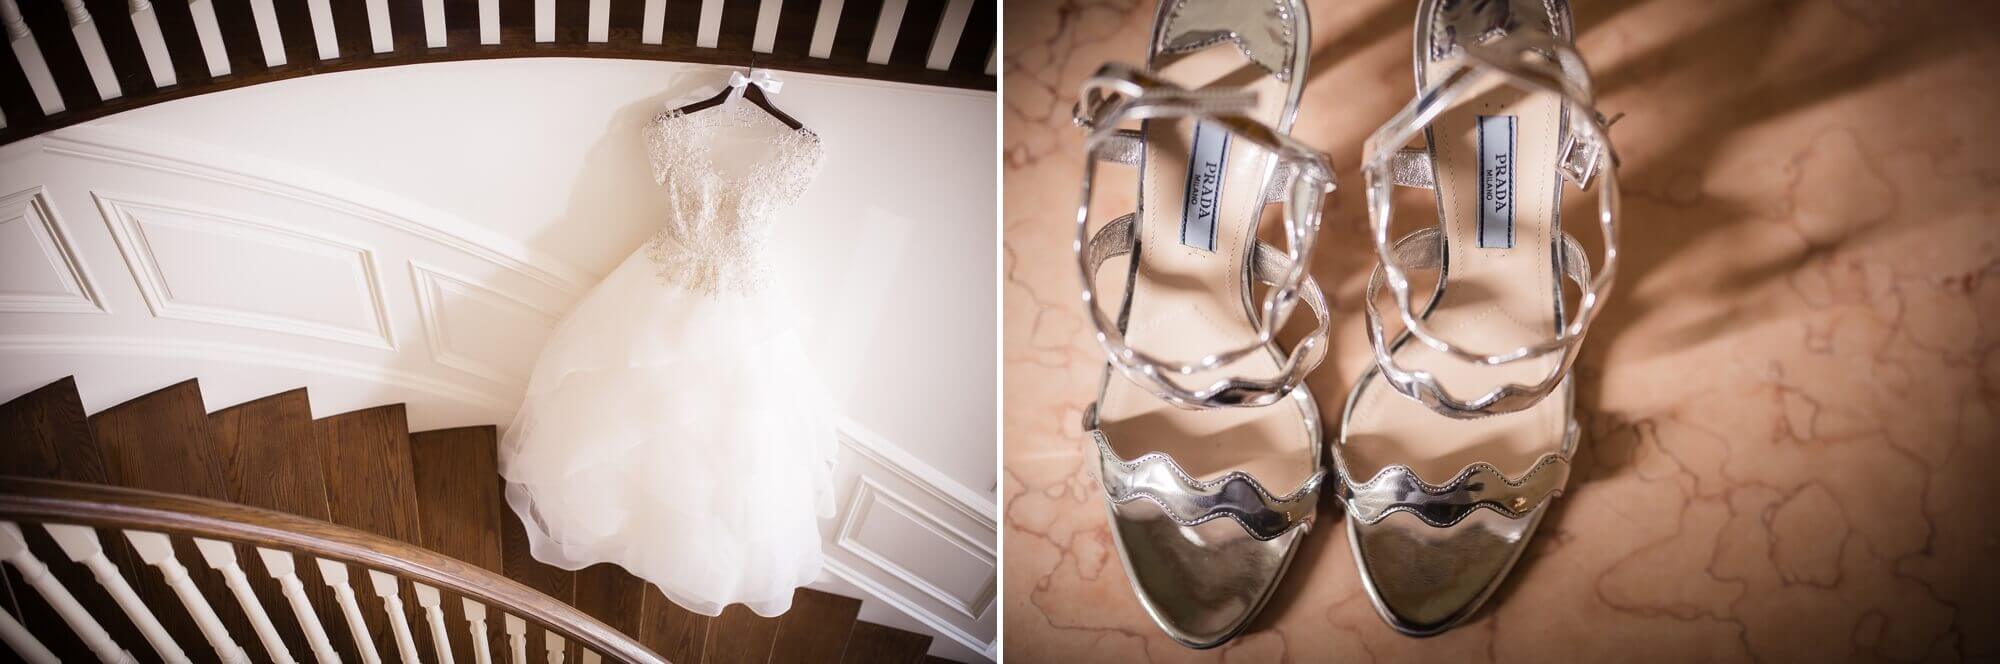 The bride's dress hangs in the stairwell, a detailed shot of the brides silver high heels.